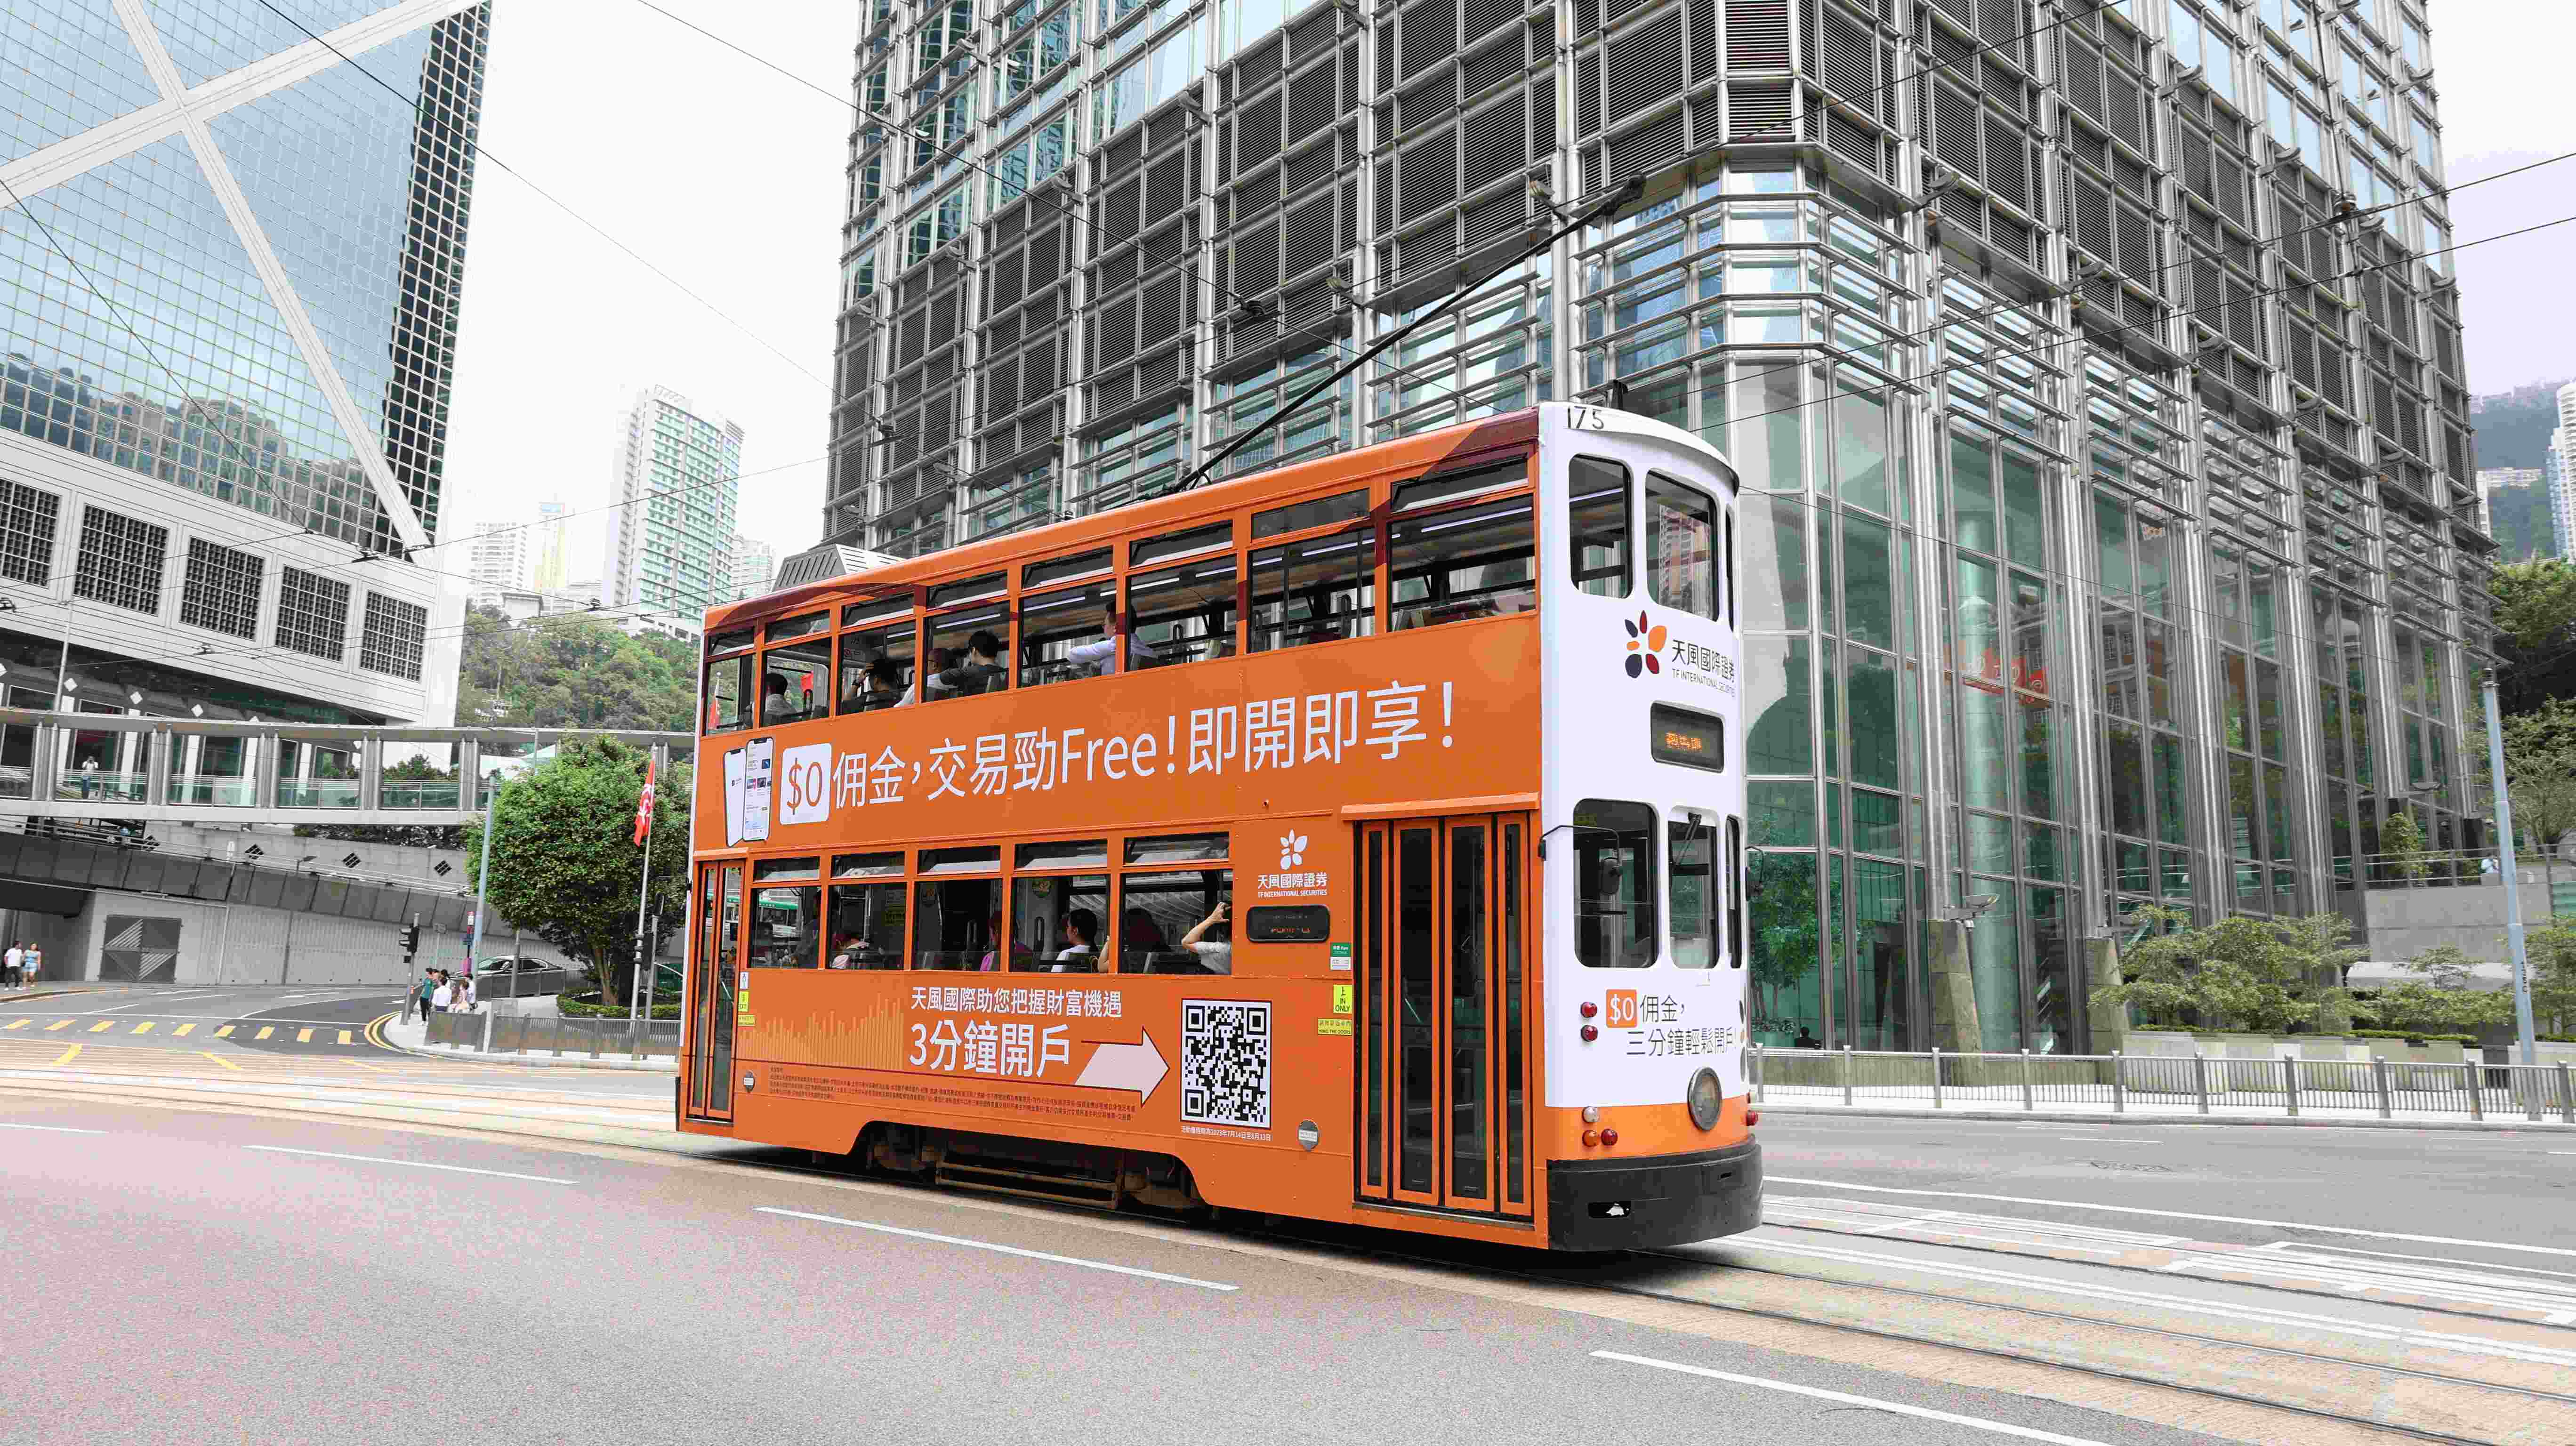 Photo of a tram in Hong Kong with advertisement from TF International